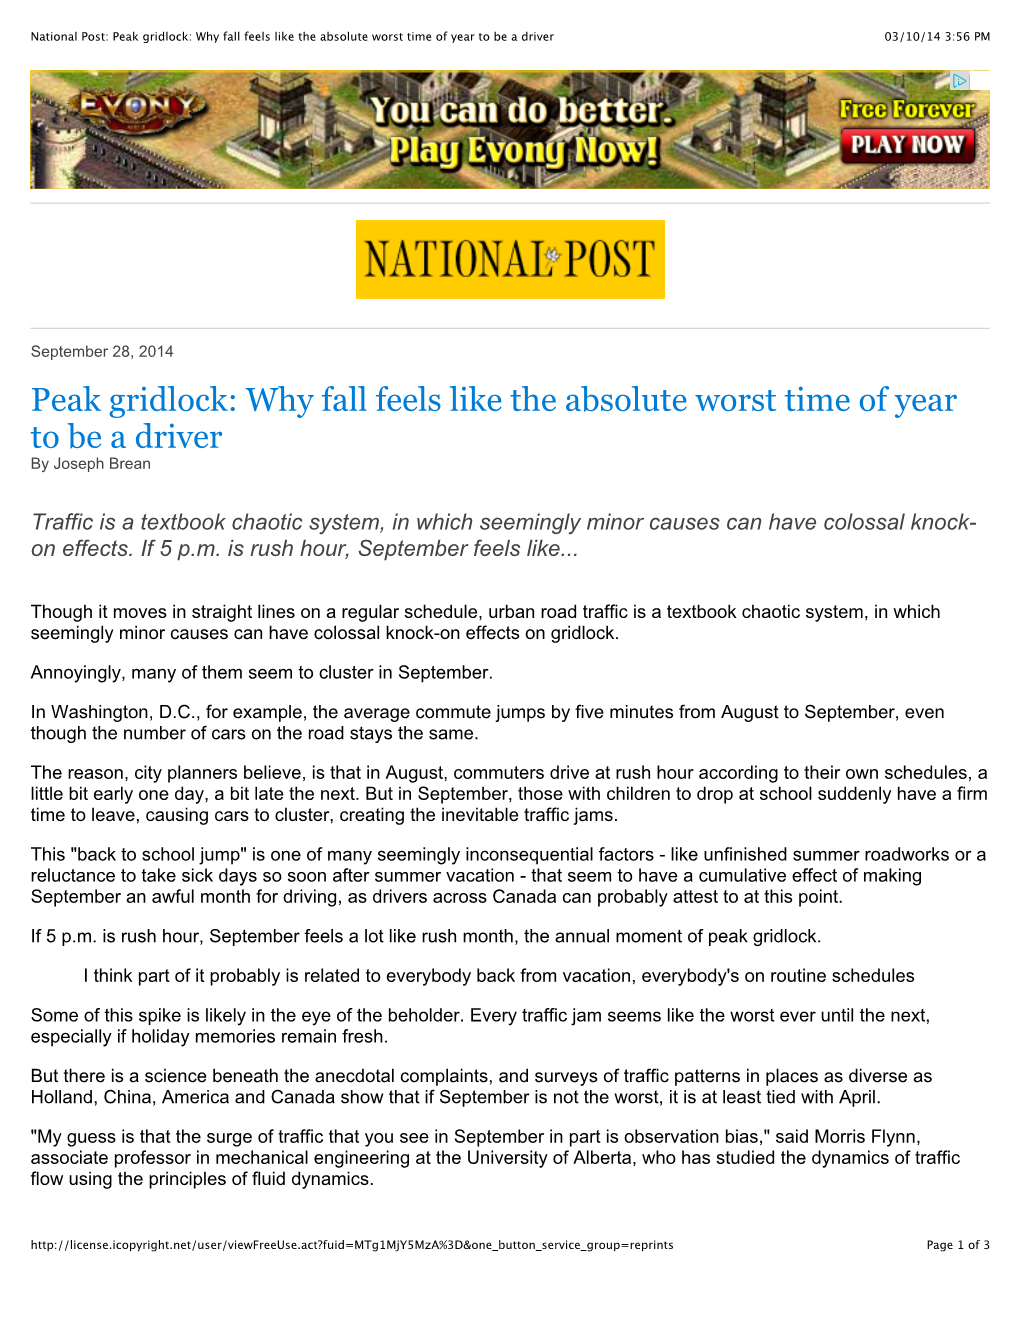 National Post Peak Gridlock Why Fall Feels Like the Absolute Worst Time of Year to Be a Driver